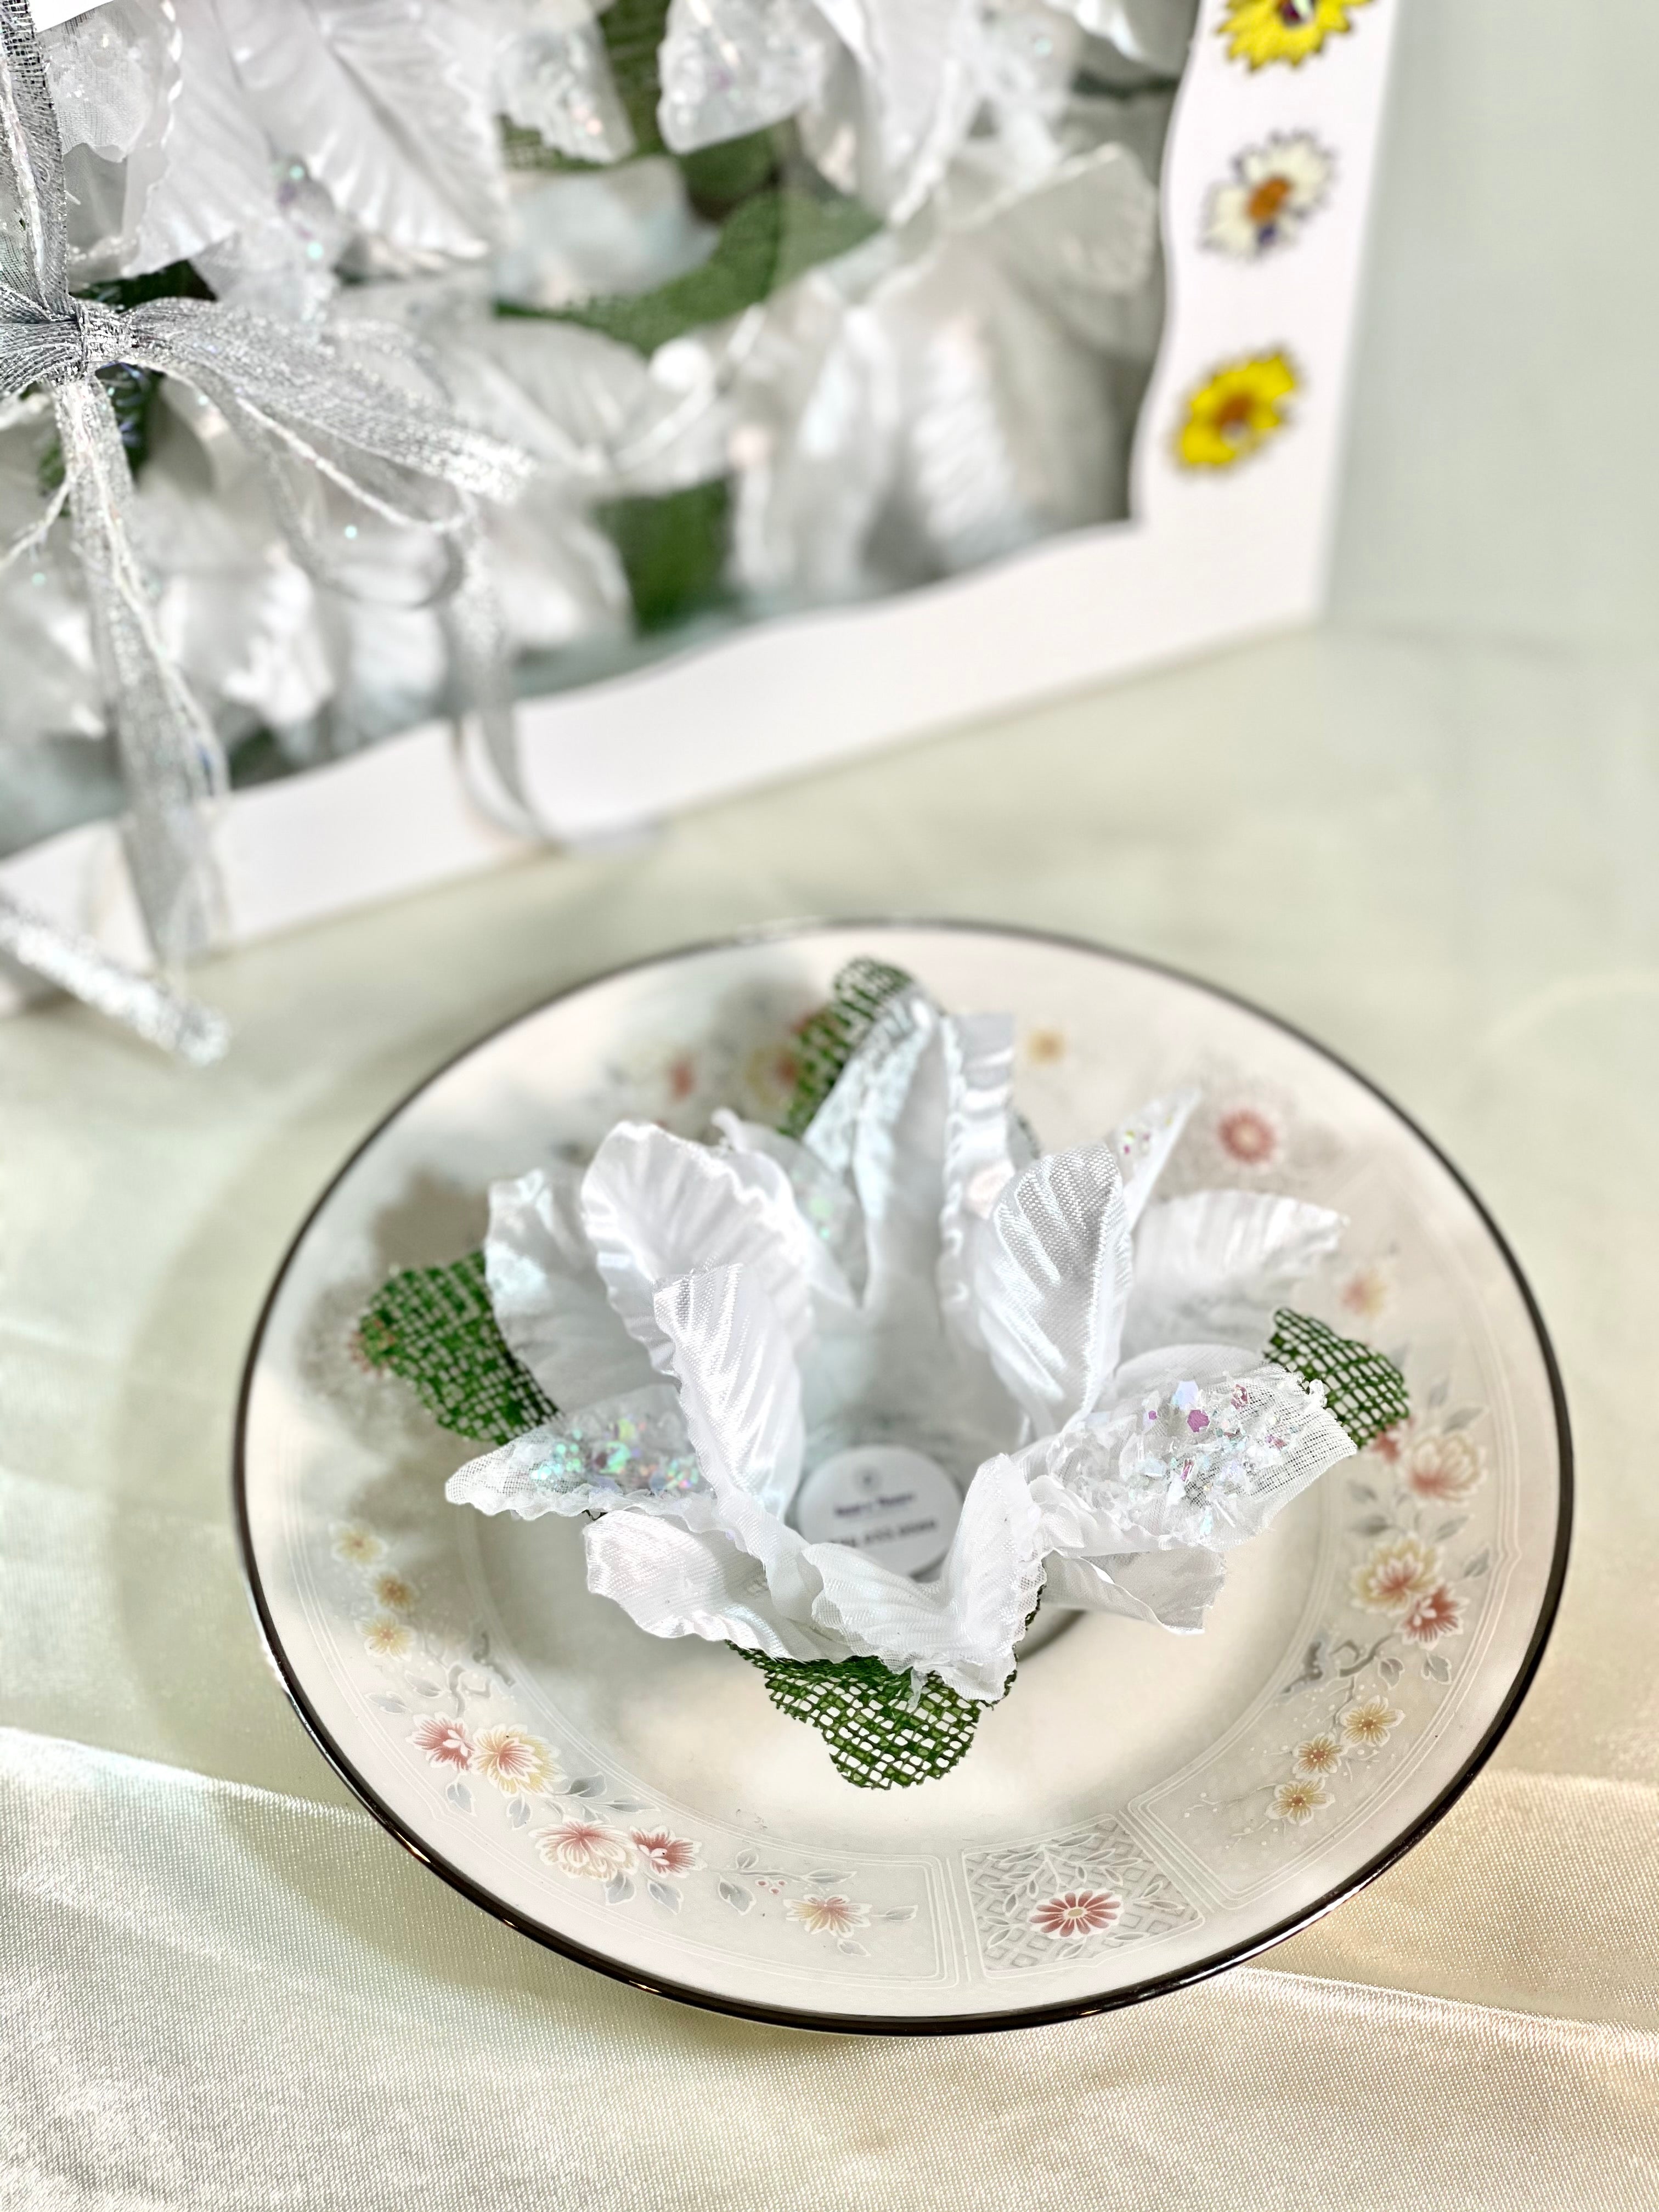 white flower with green accent sitting on a porcelain saucer